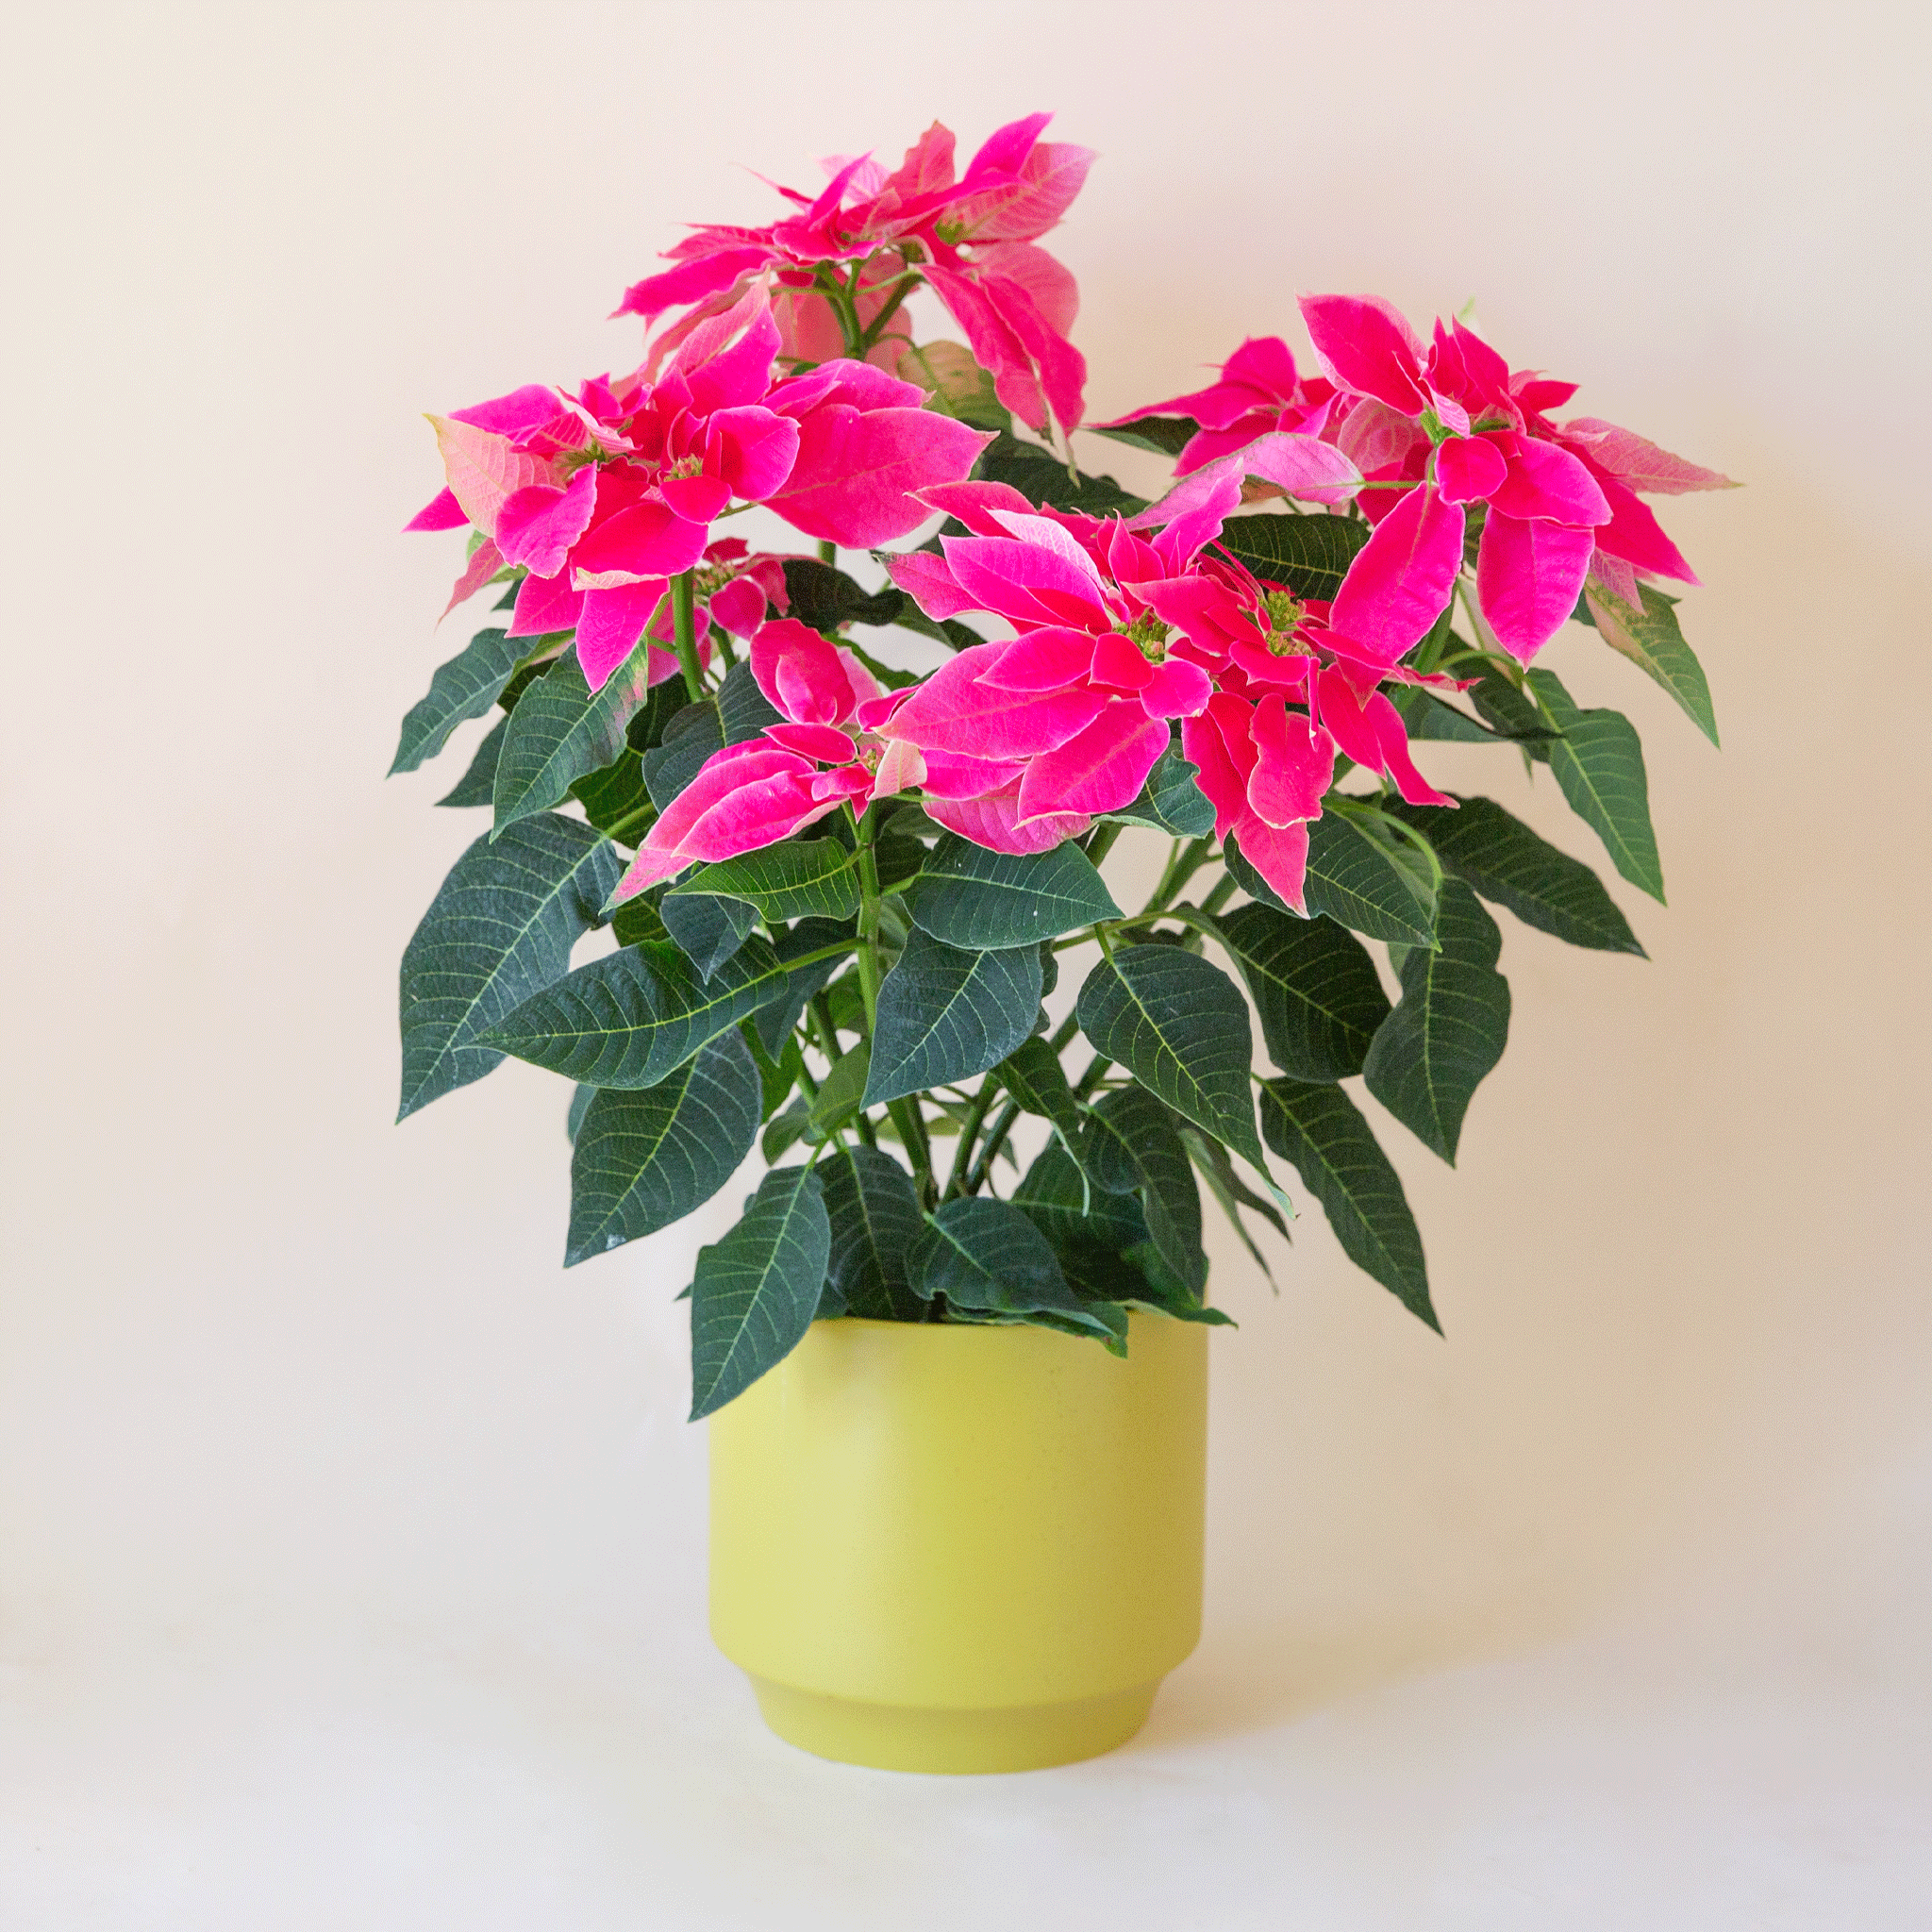 On a light pink background is one of the palm colored pots filled with hot pink poinsettias.